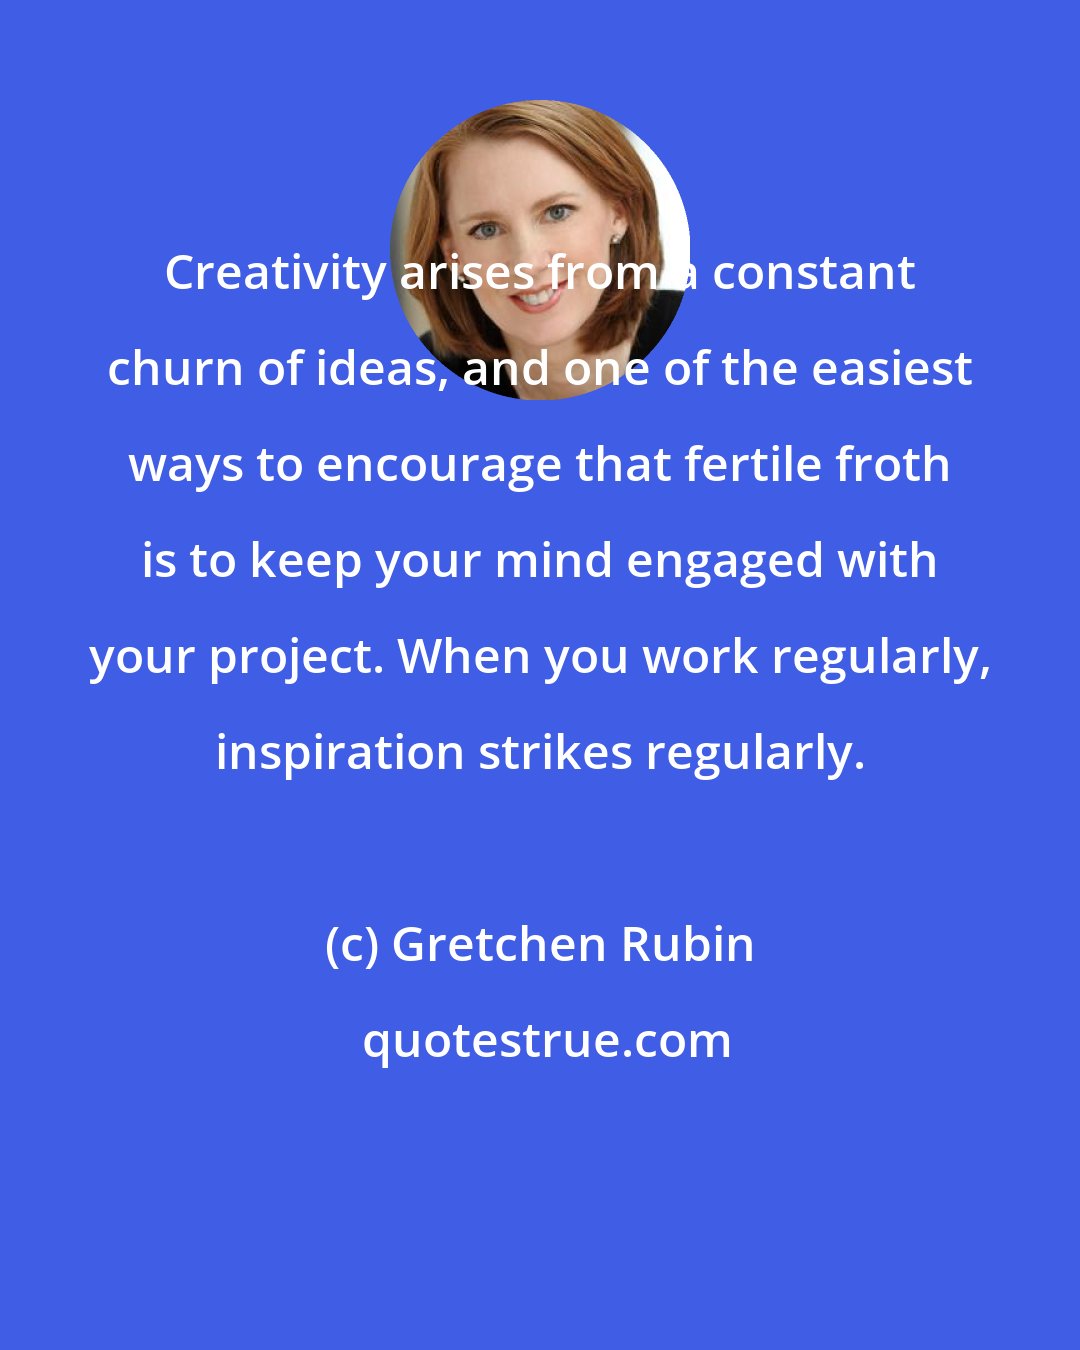 Gretchen Rubin: Creativity arises from a constant churn of ideas, and one of the easiest ways to encourage that fertile froth is to keep your mind engaged with your project. When you work regularly, inspiration strikes regularly.